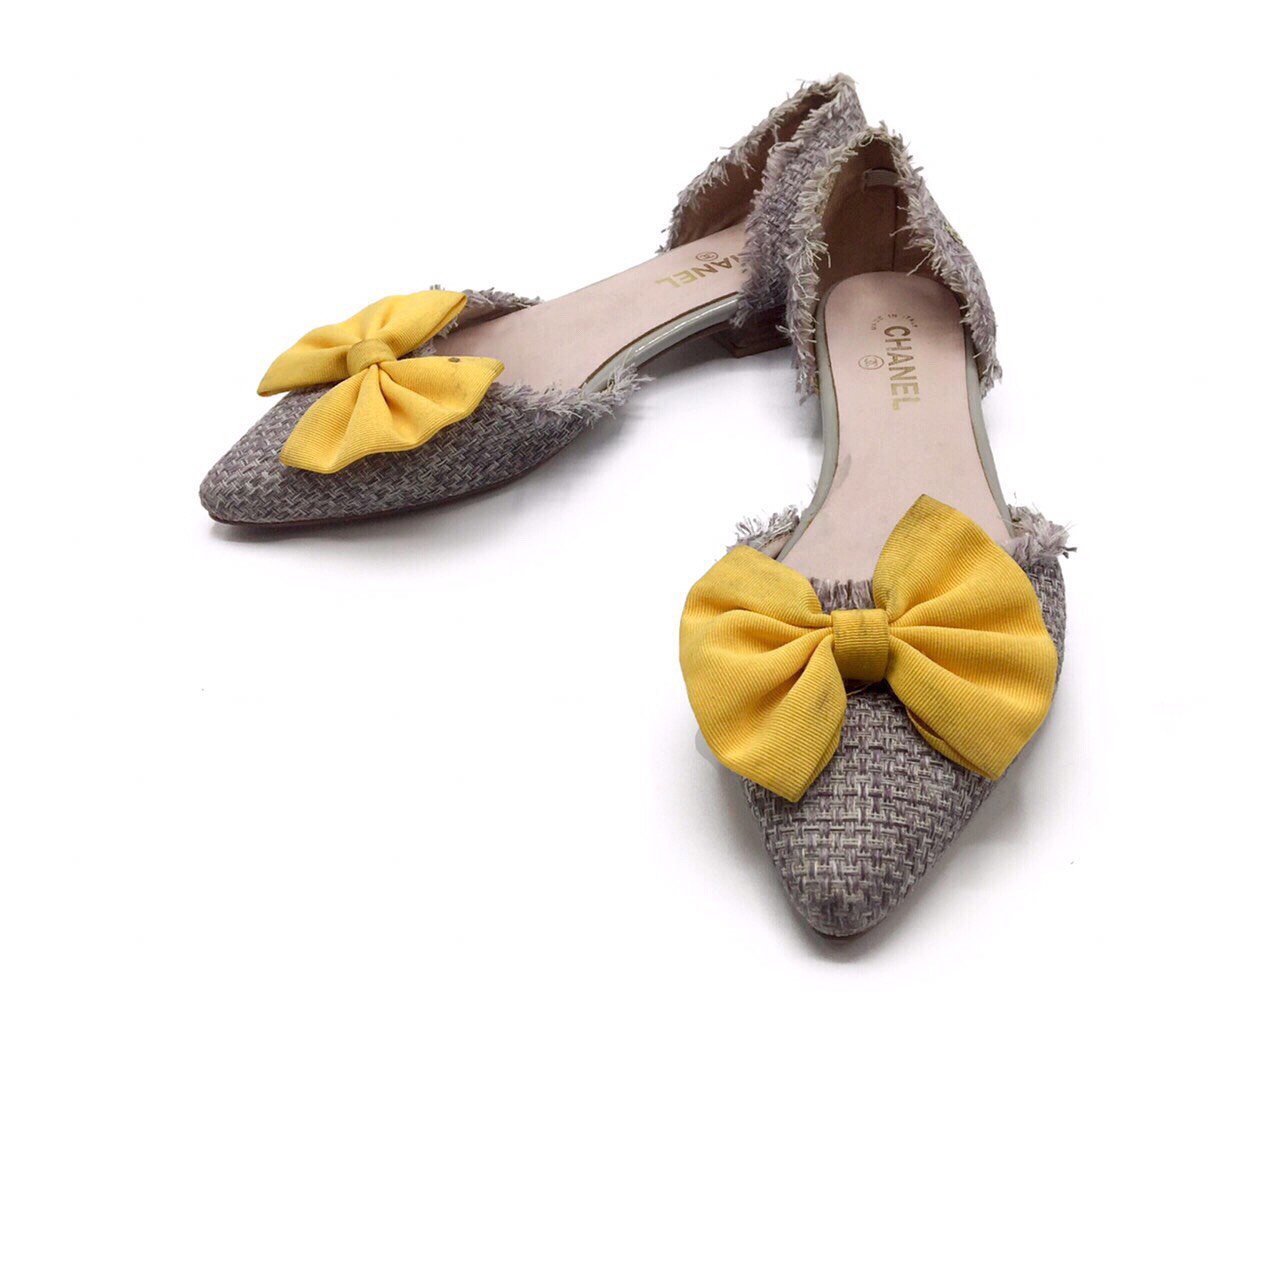 Used Chanel Tweed Shoes 38 in Yellow Bow - moppetbrandname